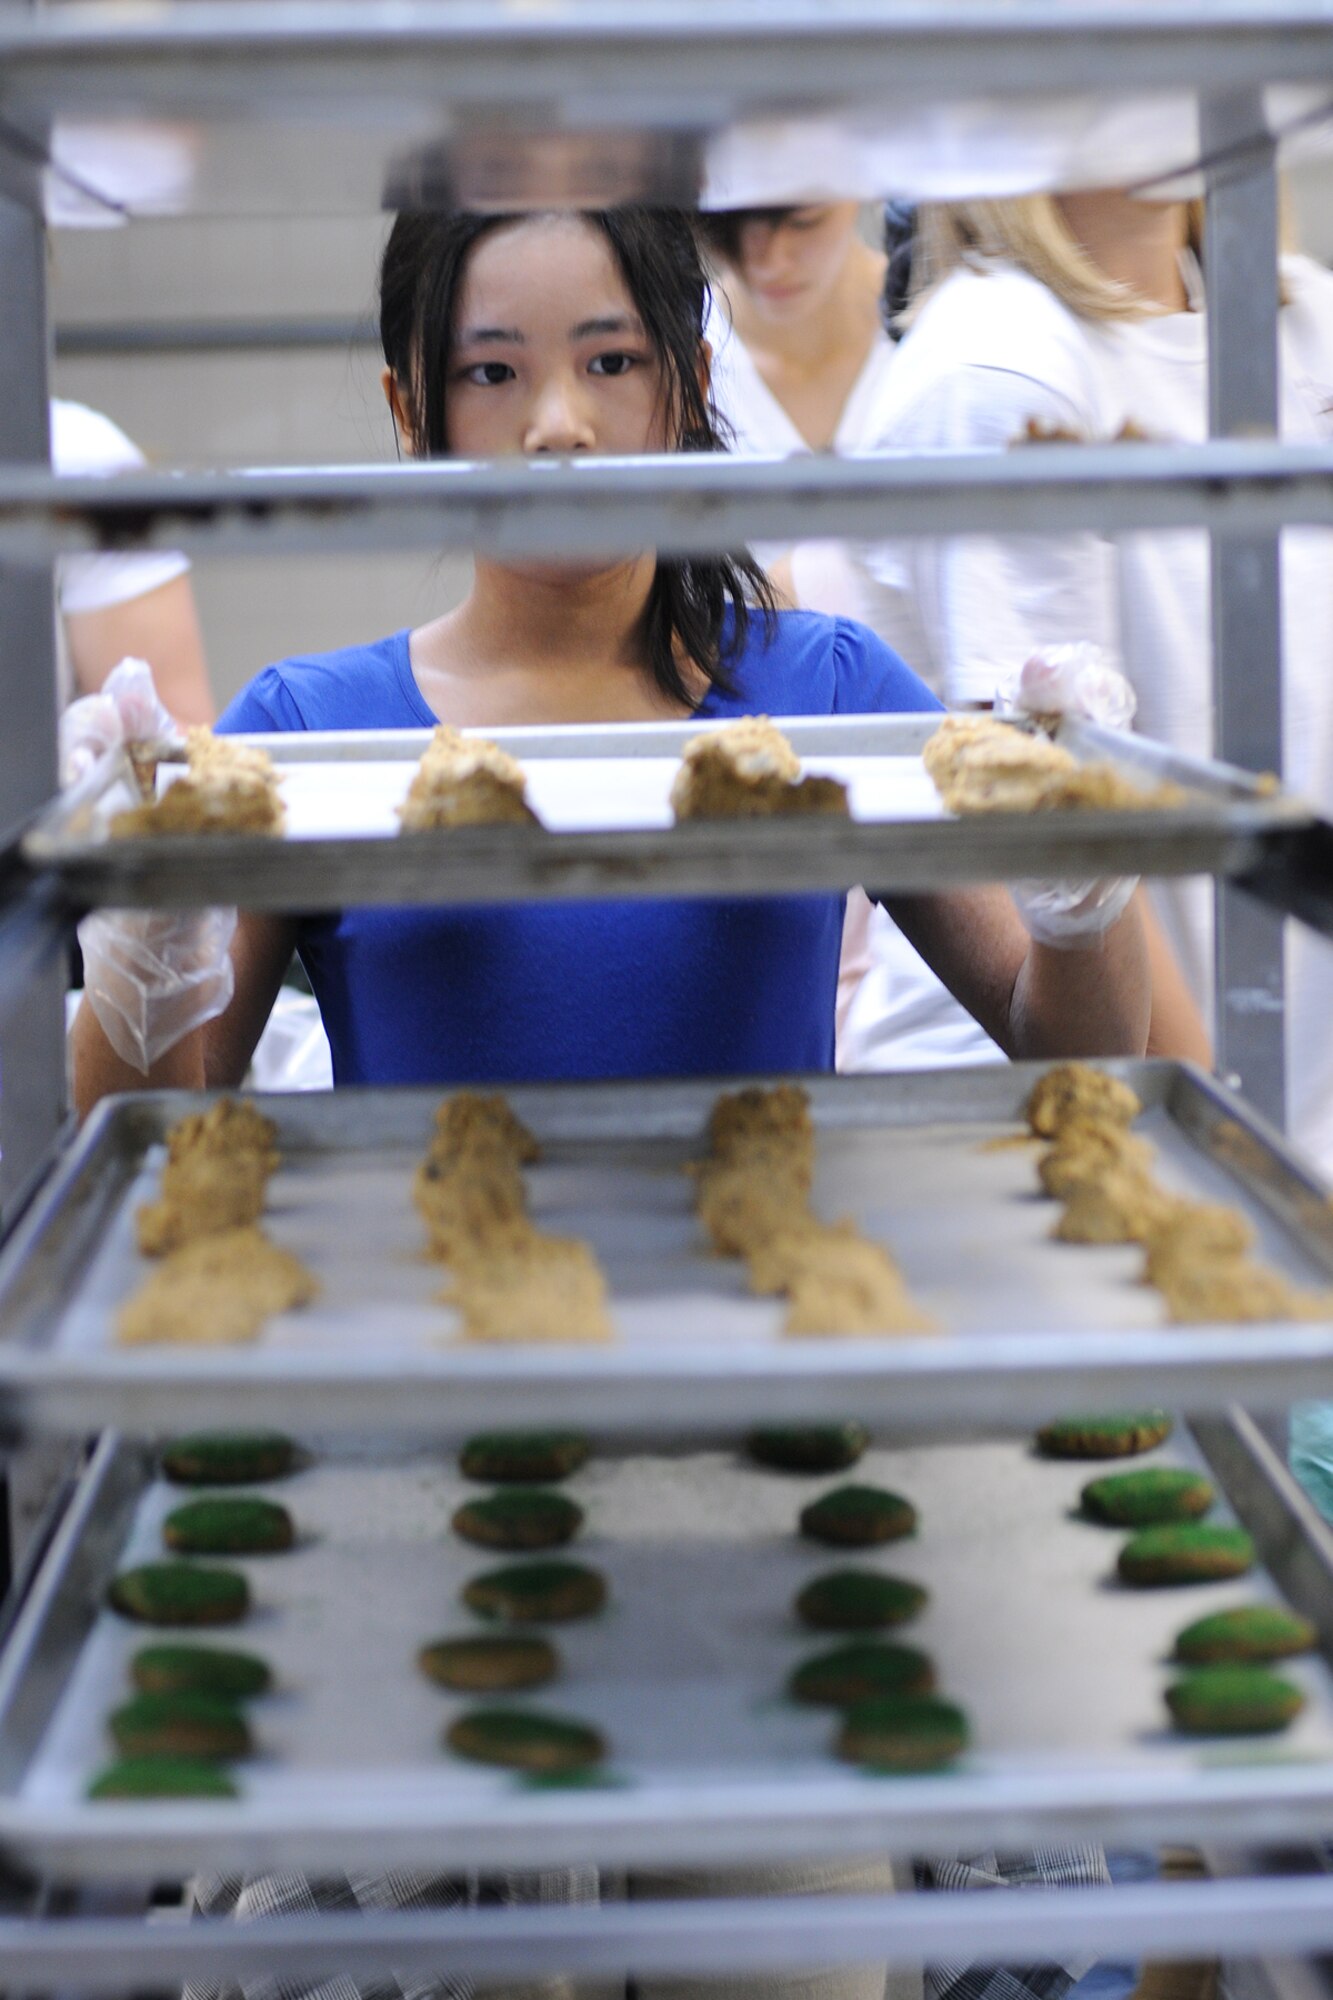 Christine Comia, a member of the National Honor Society from Kadena High School, prepares to bake a batch of cookies on Kadena Air Base, Japan Nov. 19, 2008. Volunteers prepared more than 24,000 cookies that will be delivered to servicemembers living in the dorms here at Kadena. 
(U.S. Air Force photo/Airman 1st Class Chad Warren)